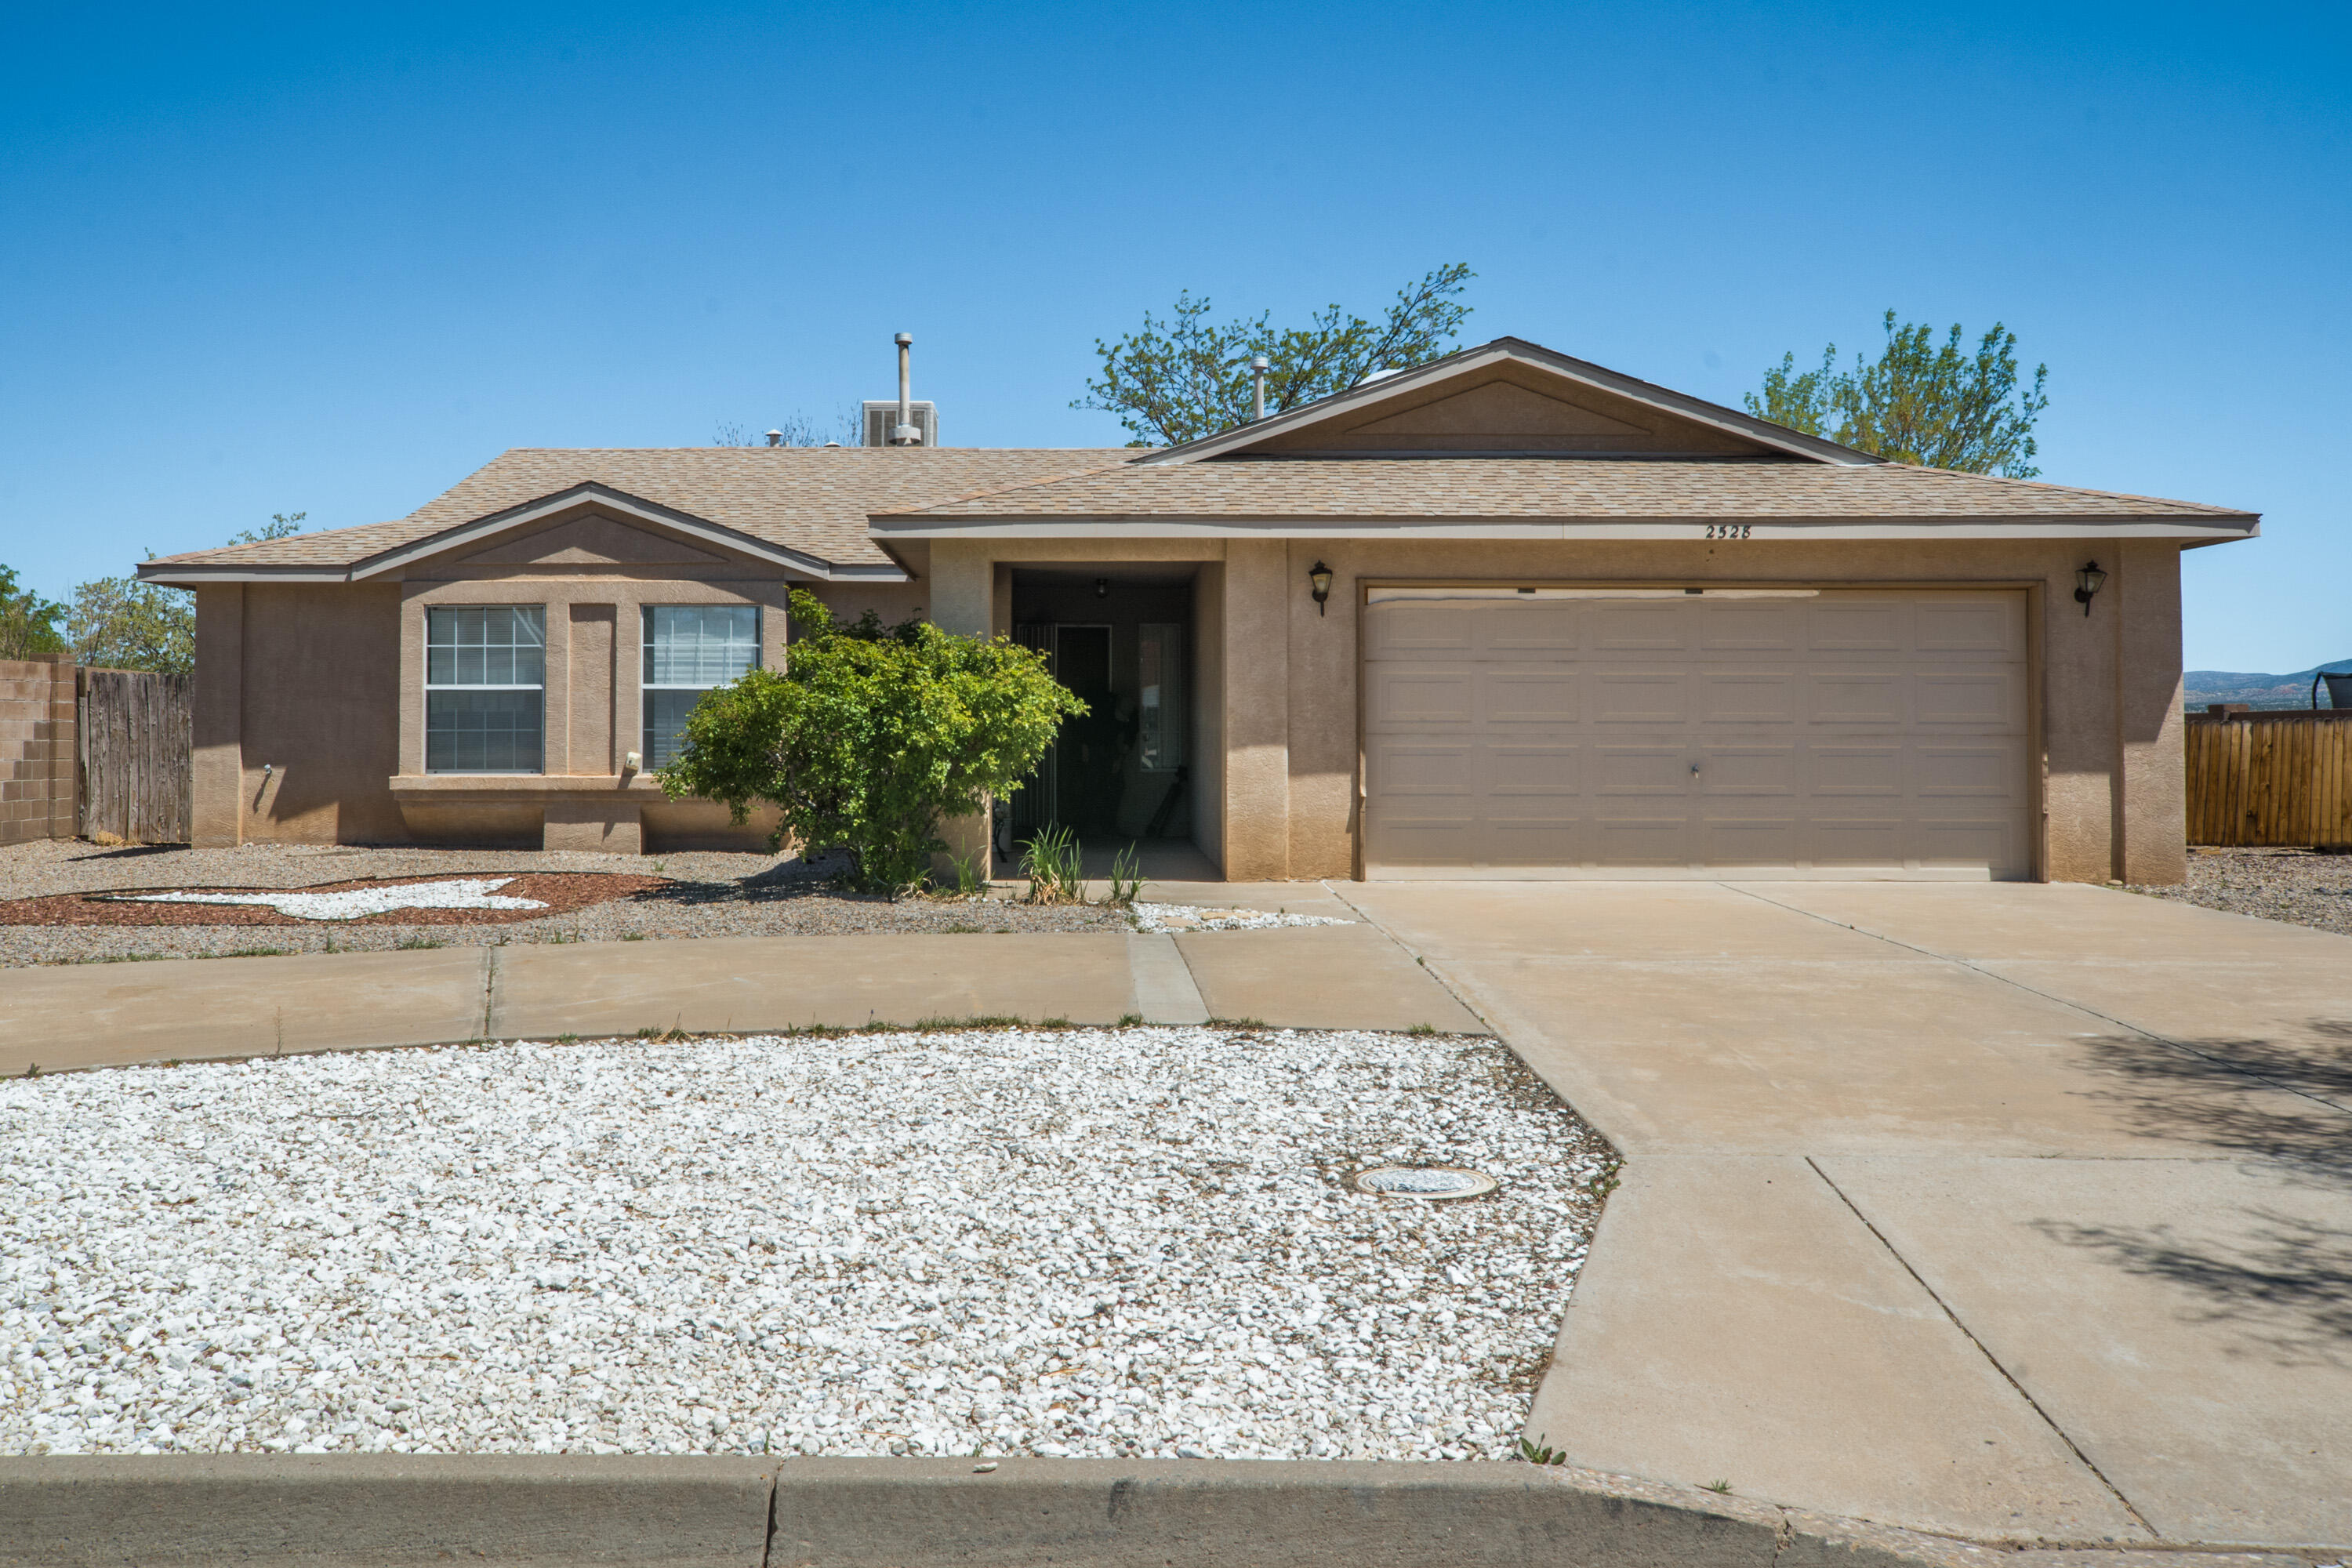 2528 Twin Buttes Drive NE, Rio Rancho, New Mexico 87144, 3 Bedrooms Bedrooms, ,2 BathroomsBathrooms,Residential,For Sale,2528 Twin Buttes Drive NE,1060950